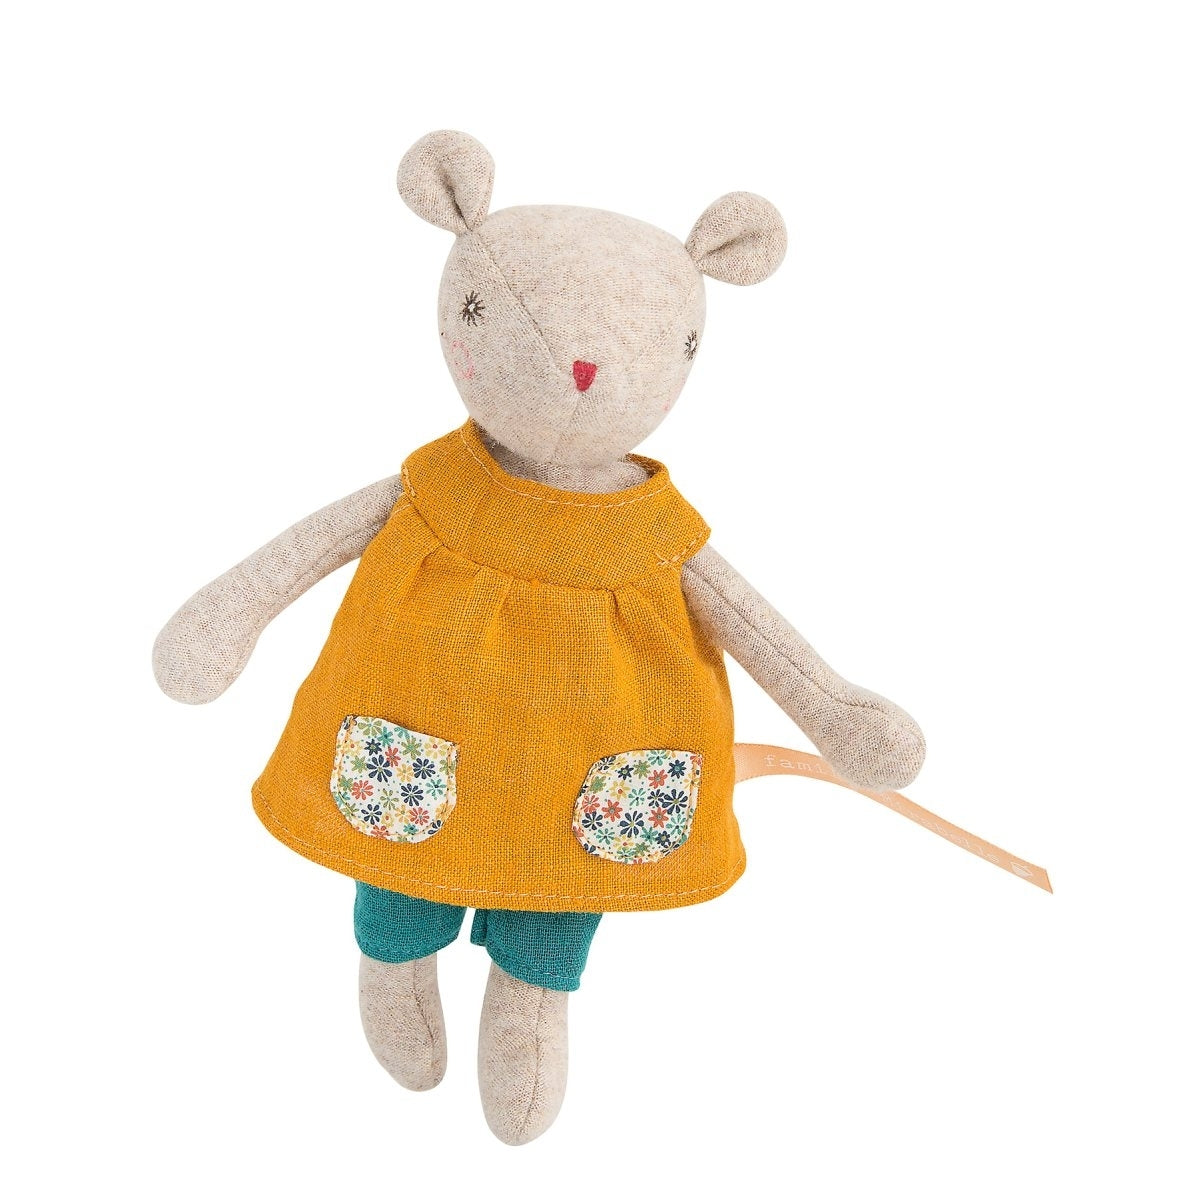 Petite Souris Groseille by Moulin Roty 